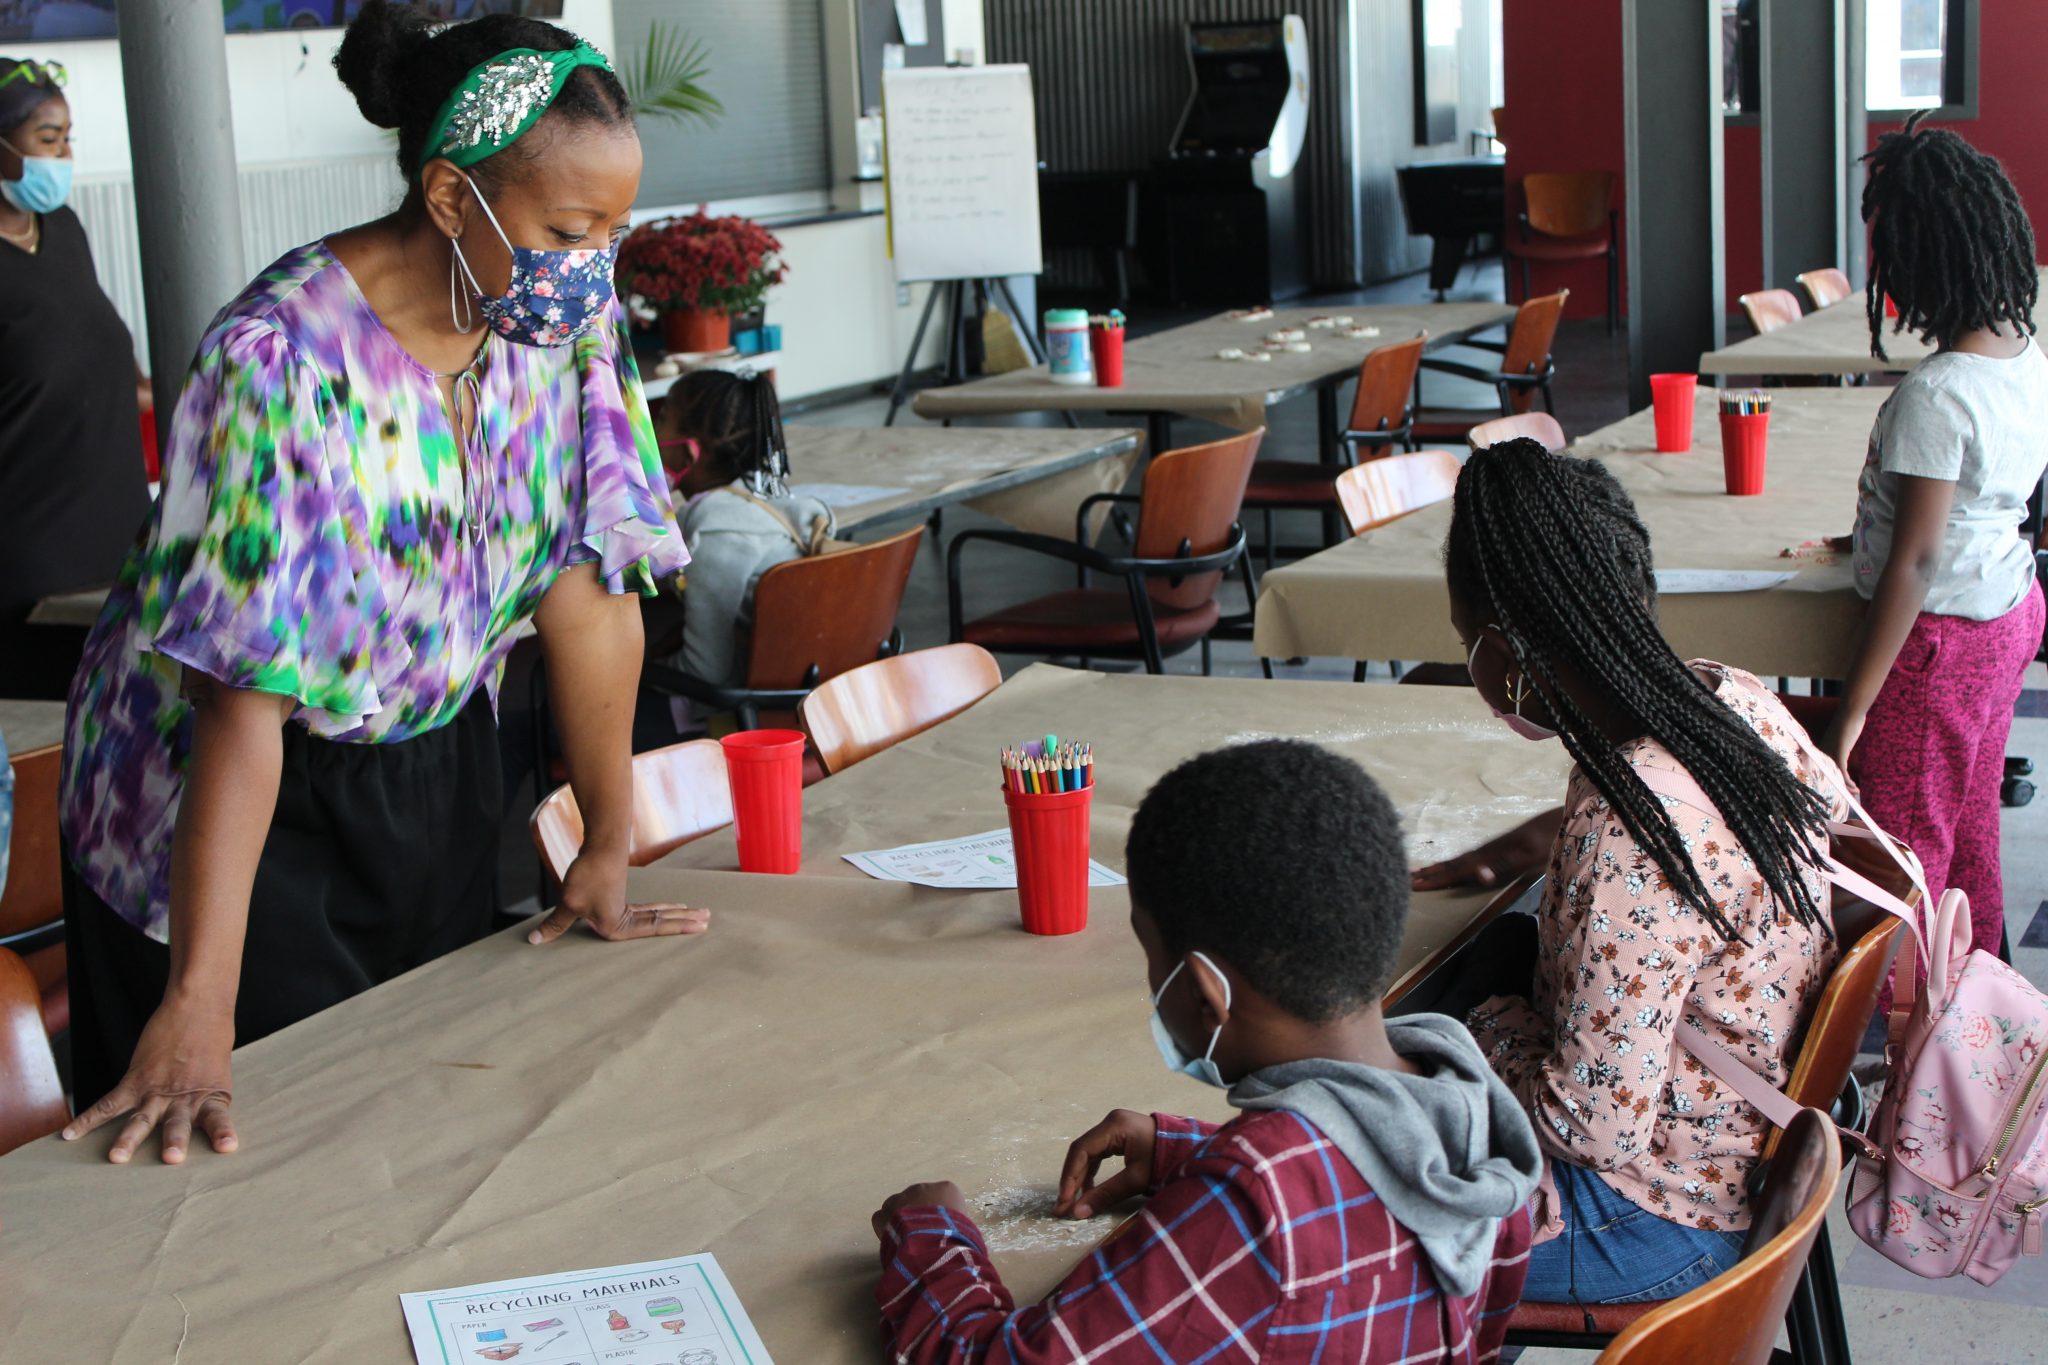 DESIGNER, TRACY REESE EDUCATING DETROIT'S YOUTH ON THE ARTS